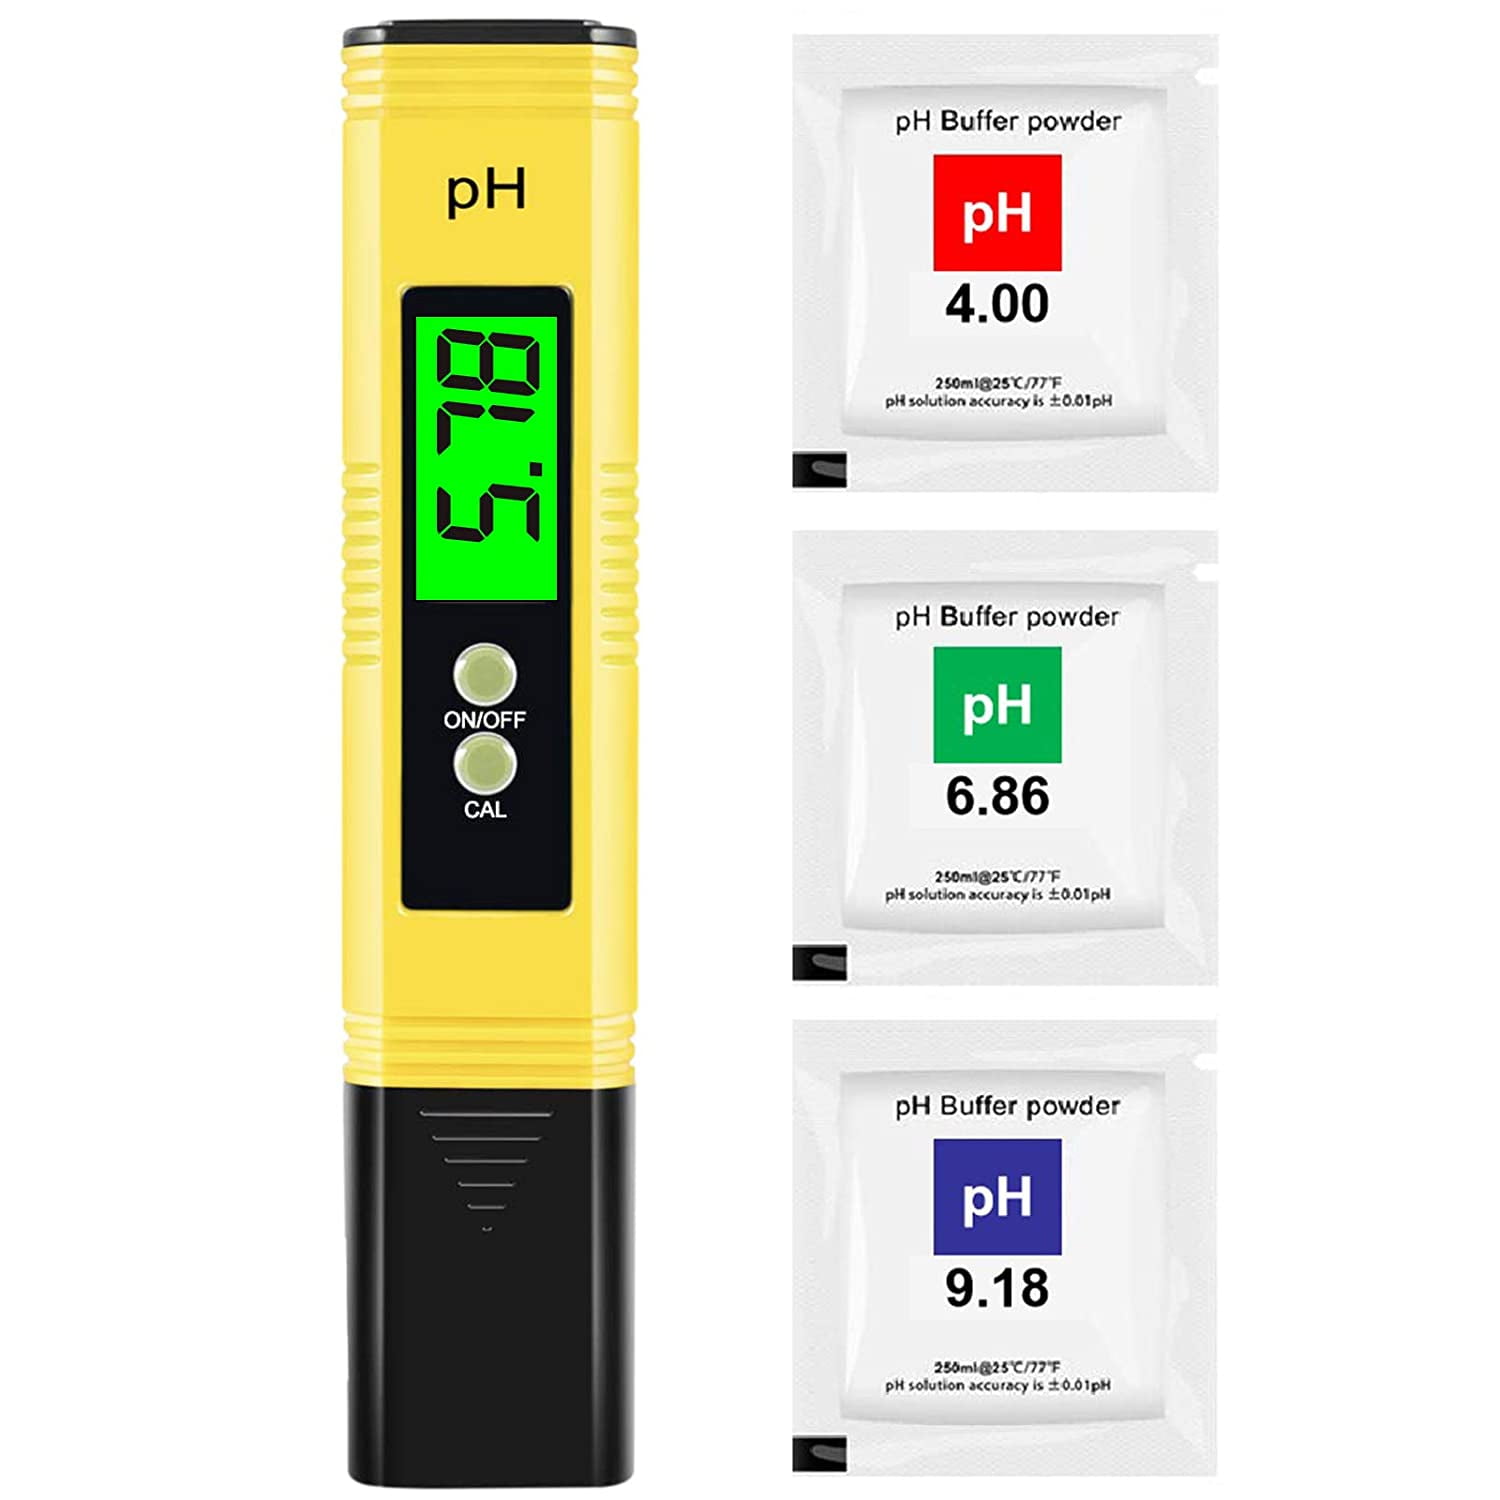 Swimming Pools Hydroponics Aquariums INTBUYING 0.1pH High Accuracy Digital pH Meter/pH Pocket Pen Tester with ATC LCD 0-14 pH Measurement Range for Household Drinking Water